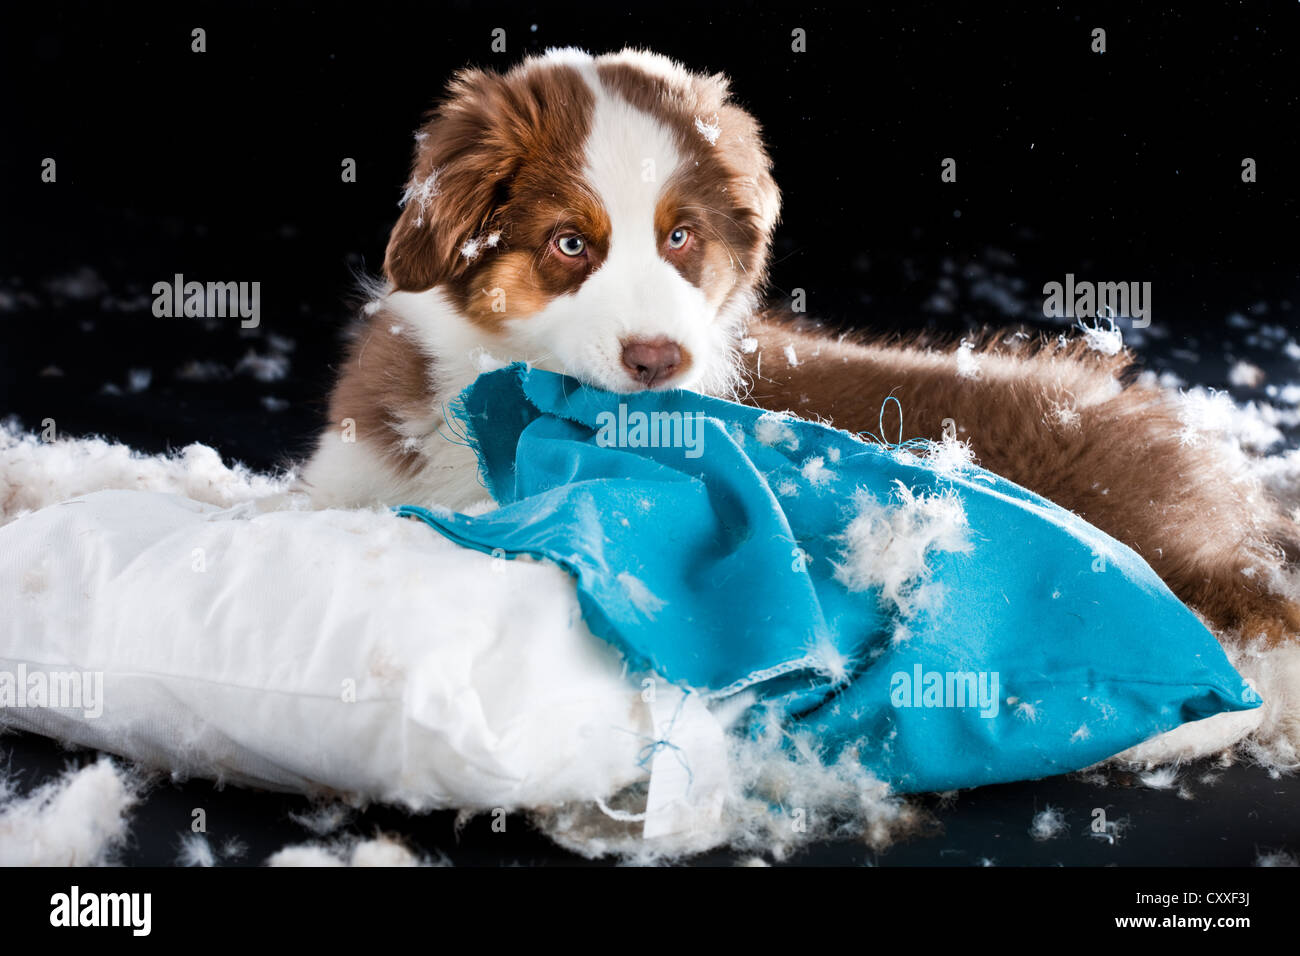 Australian Shepherd puppy biting a cushion and tearing out the stuffing Stock Photo